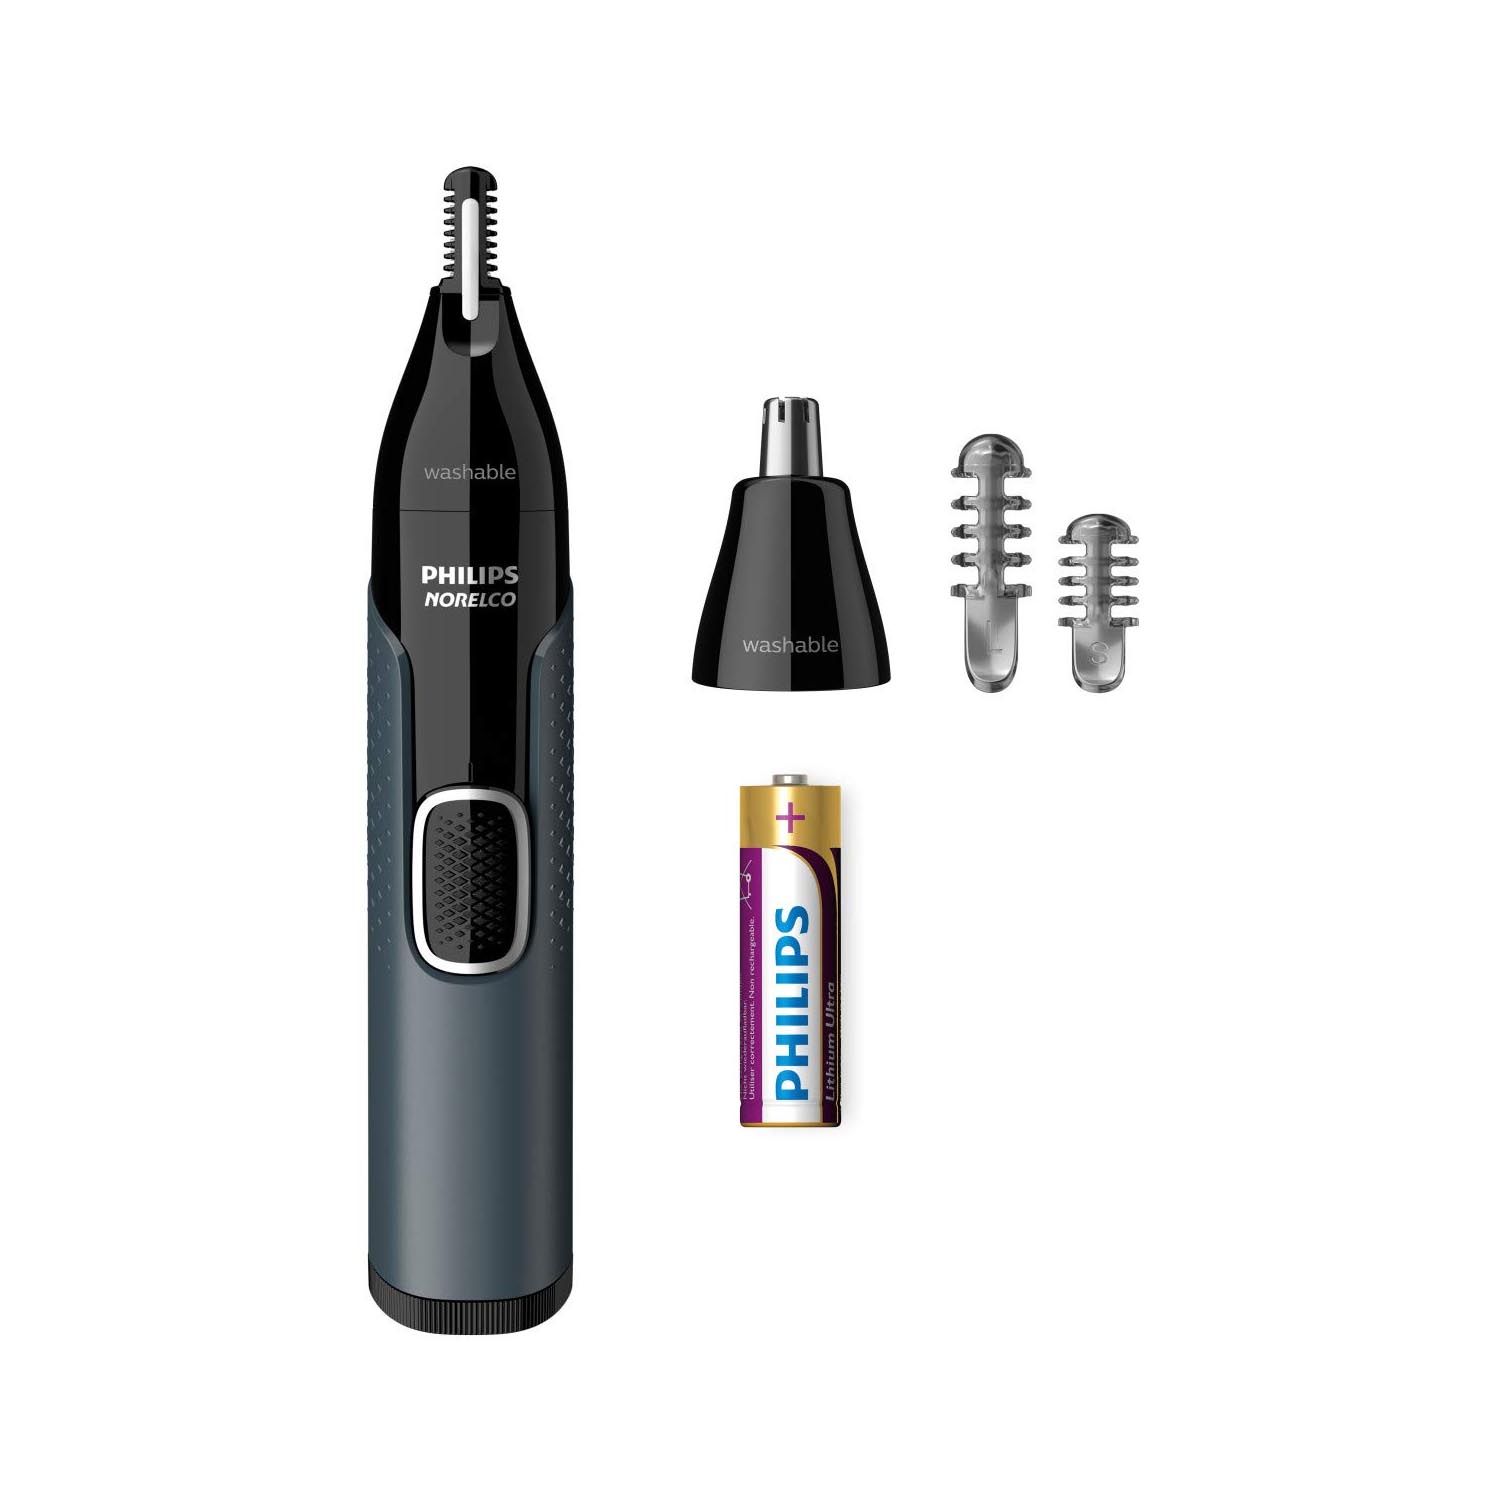 Philips Norelco Nose Hair Trimmer 3000 - Black - Pinedale General Store